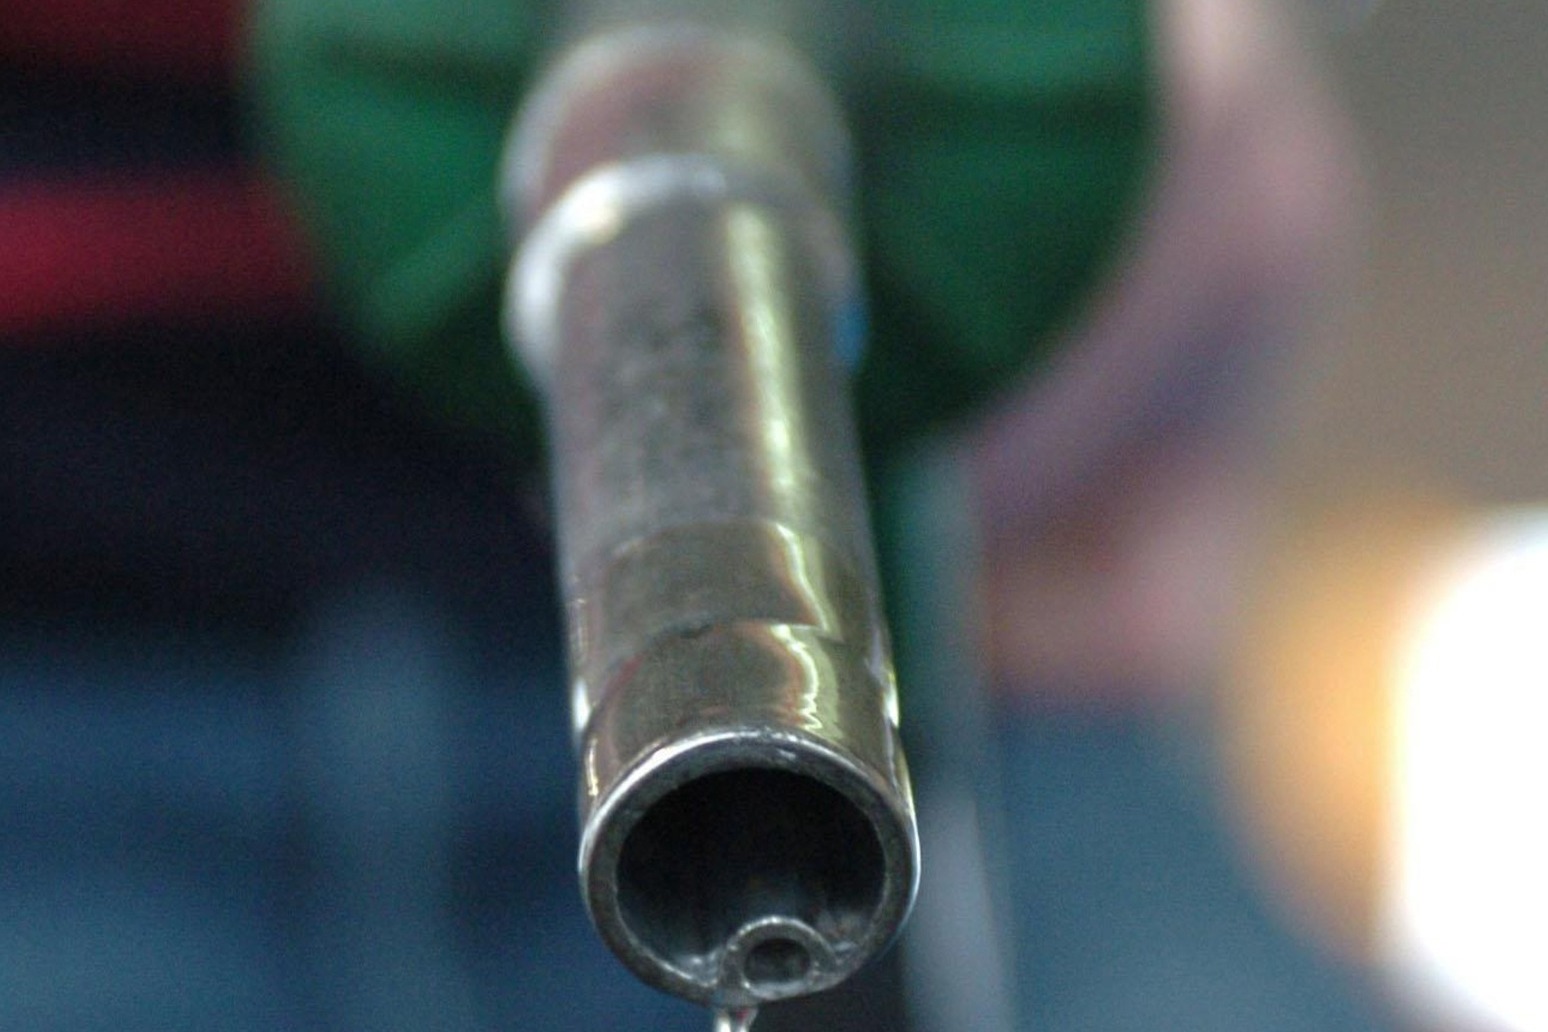 Drivers warned to expect rise in fuel prices ‘soon’ as Russia invades Ukraine 